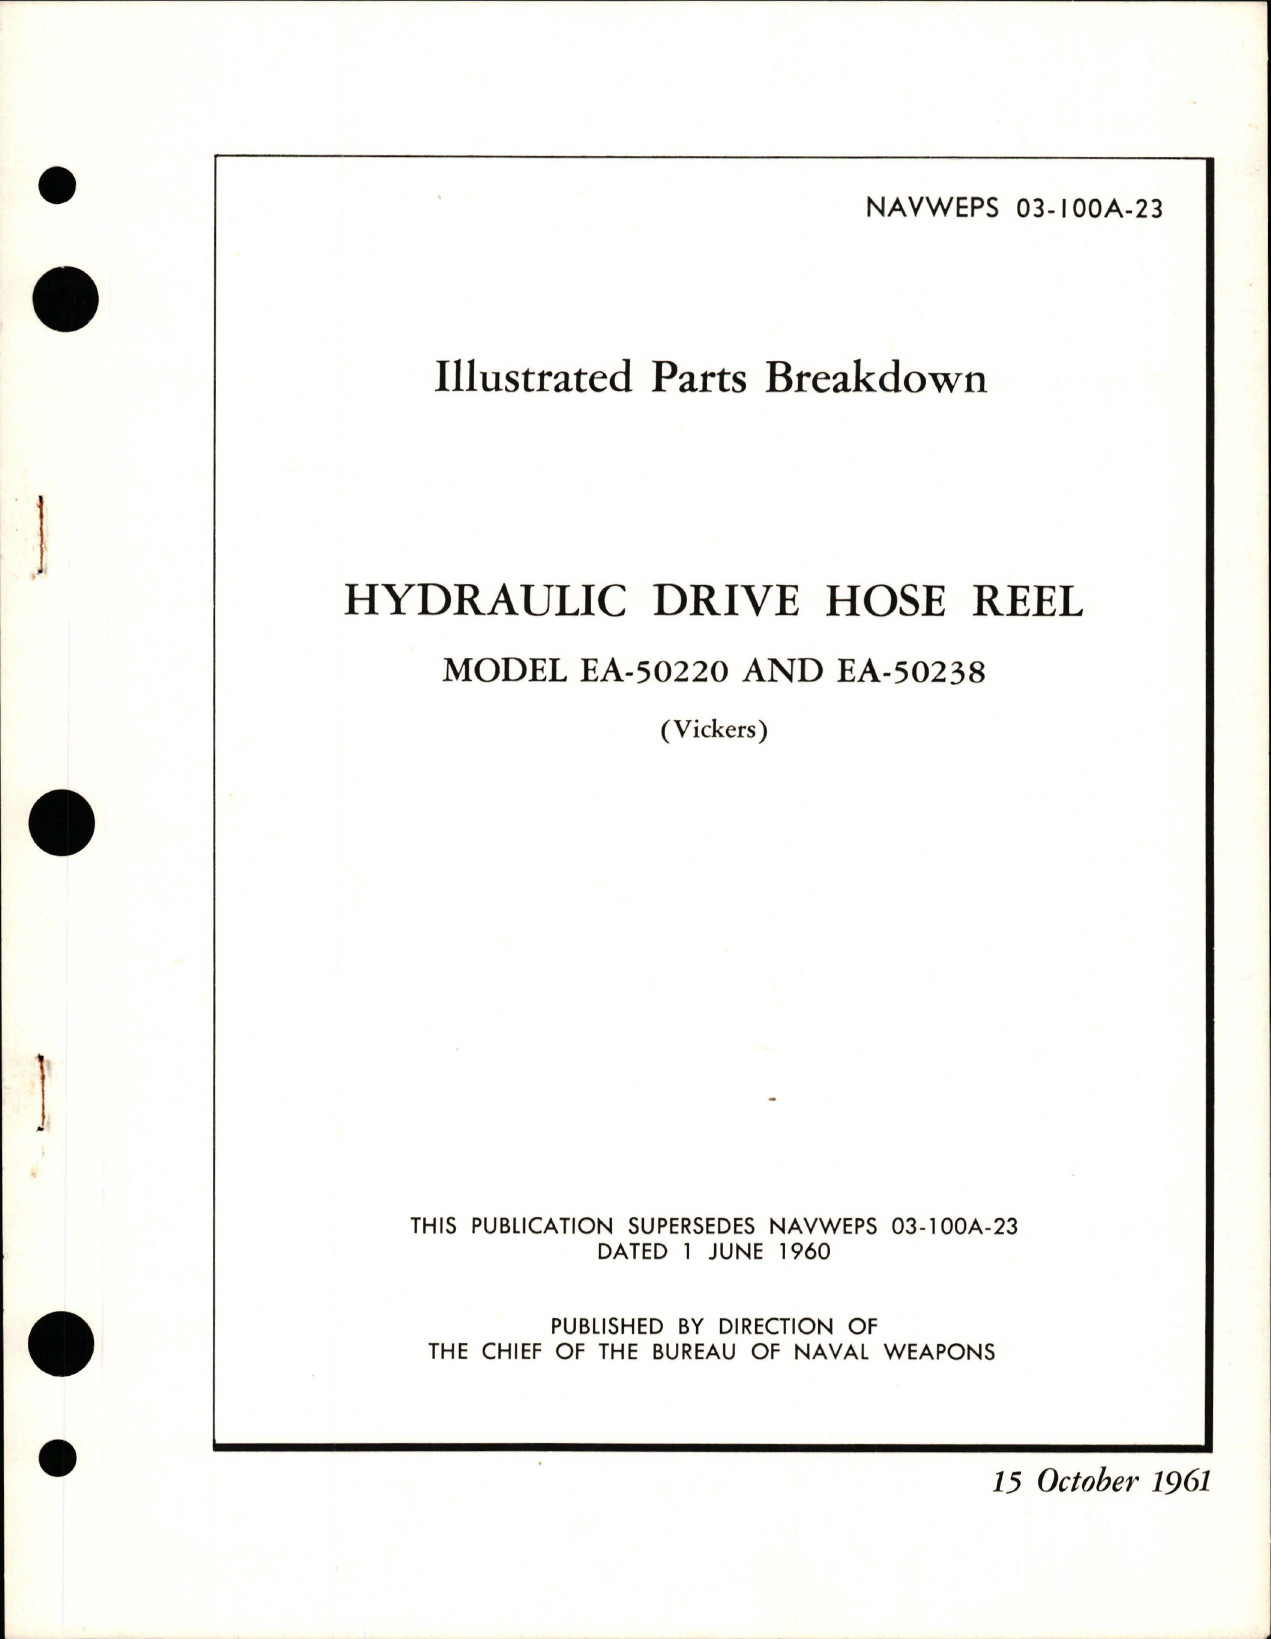 Sample page 1 from AirCorps Library document: Illustrated Parts Breakdown for Hydraulic Drive Hose Reel - Models EA-50220 and EA-50238 